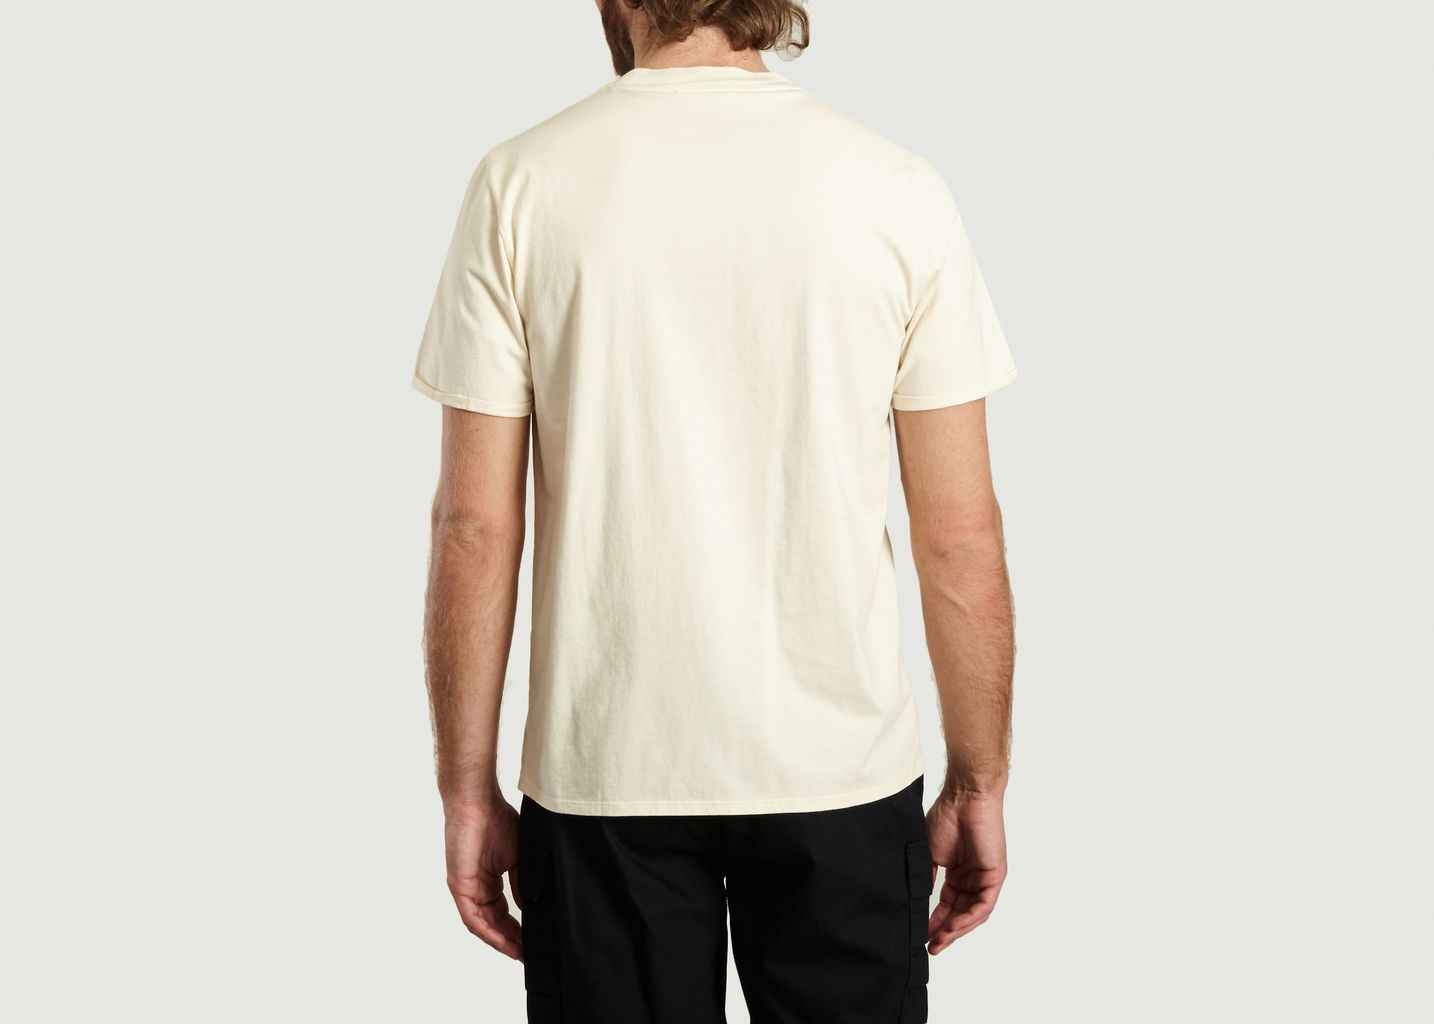 Compay T-Shirt - Uniforms For The Dedicated